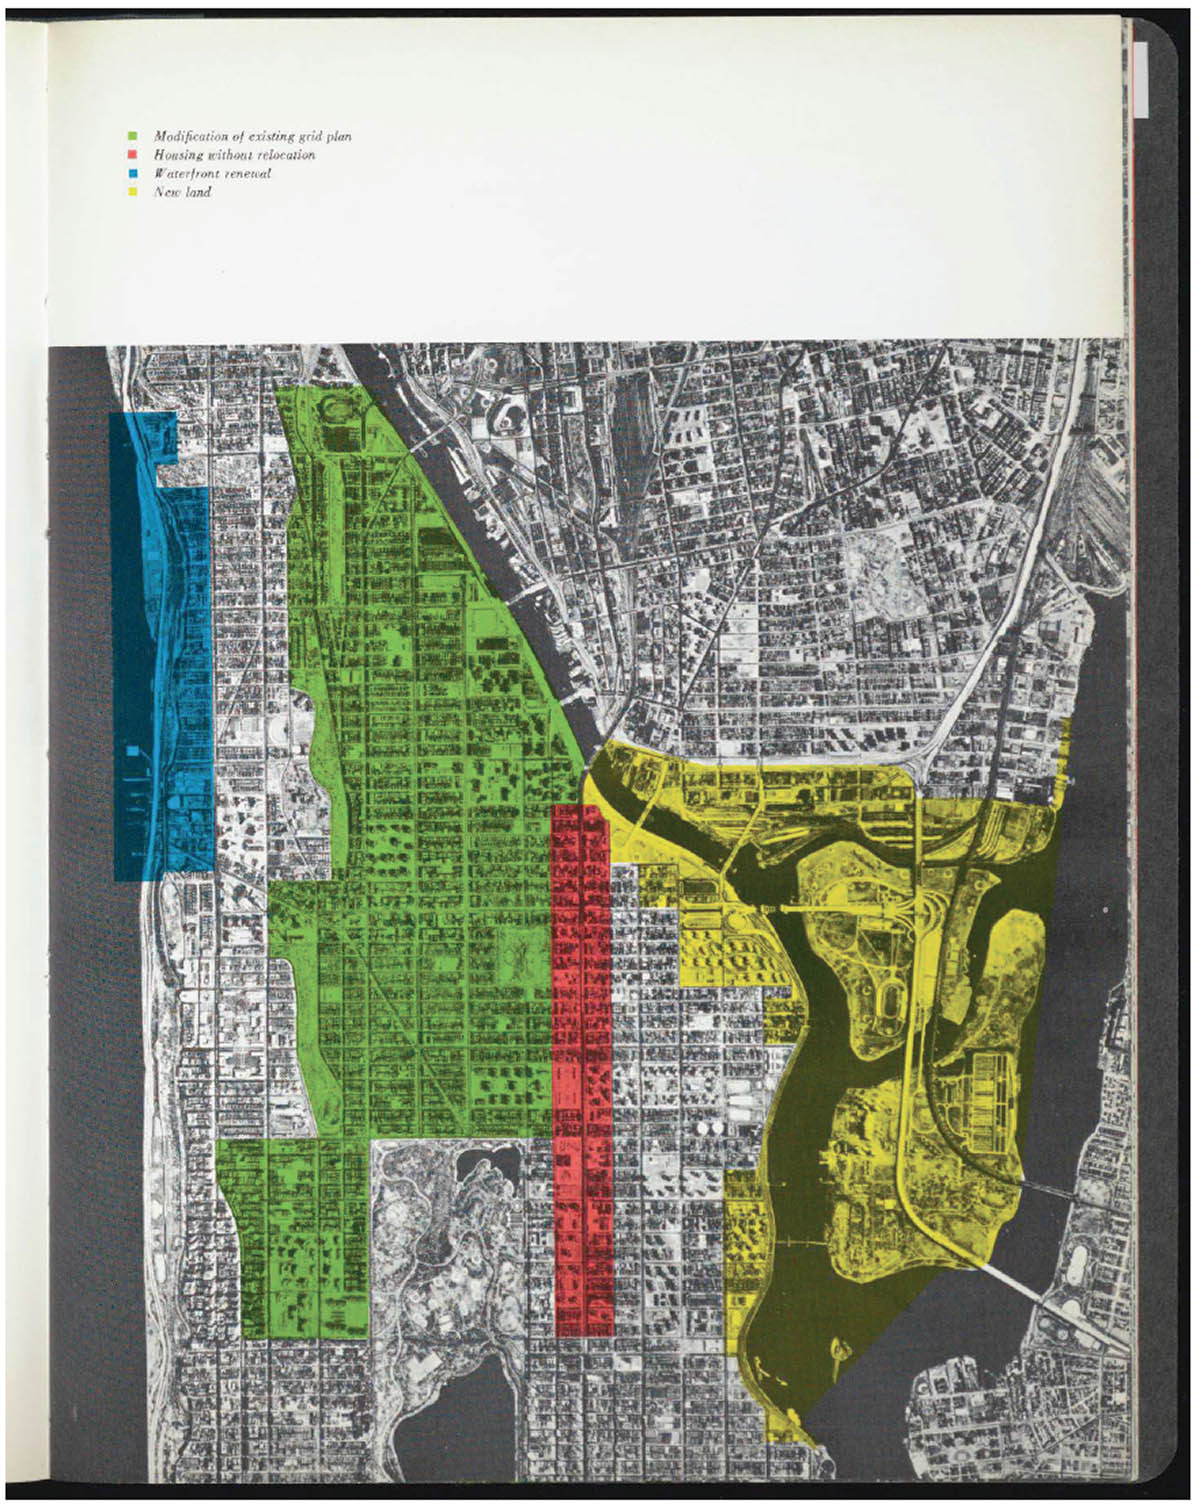 Aerial view of New York City, with sections colored in blue, green, red, and yellow.